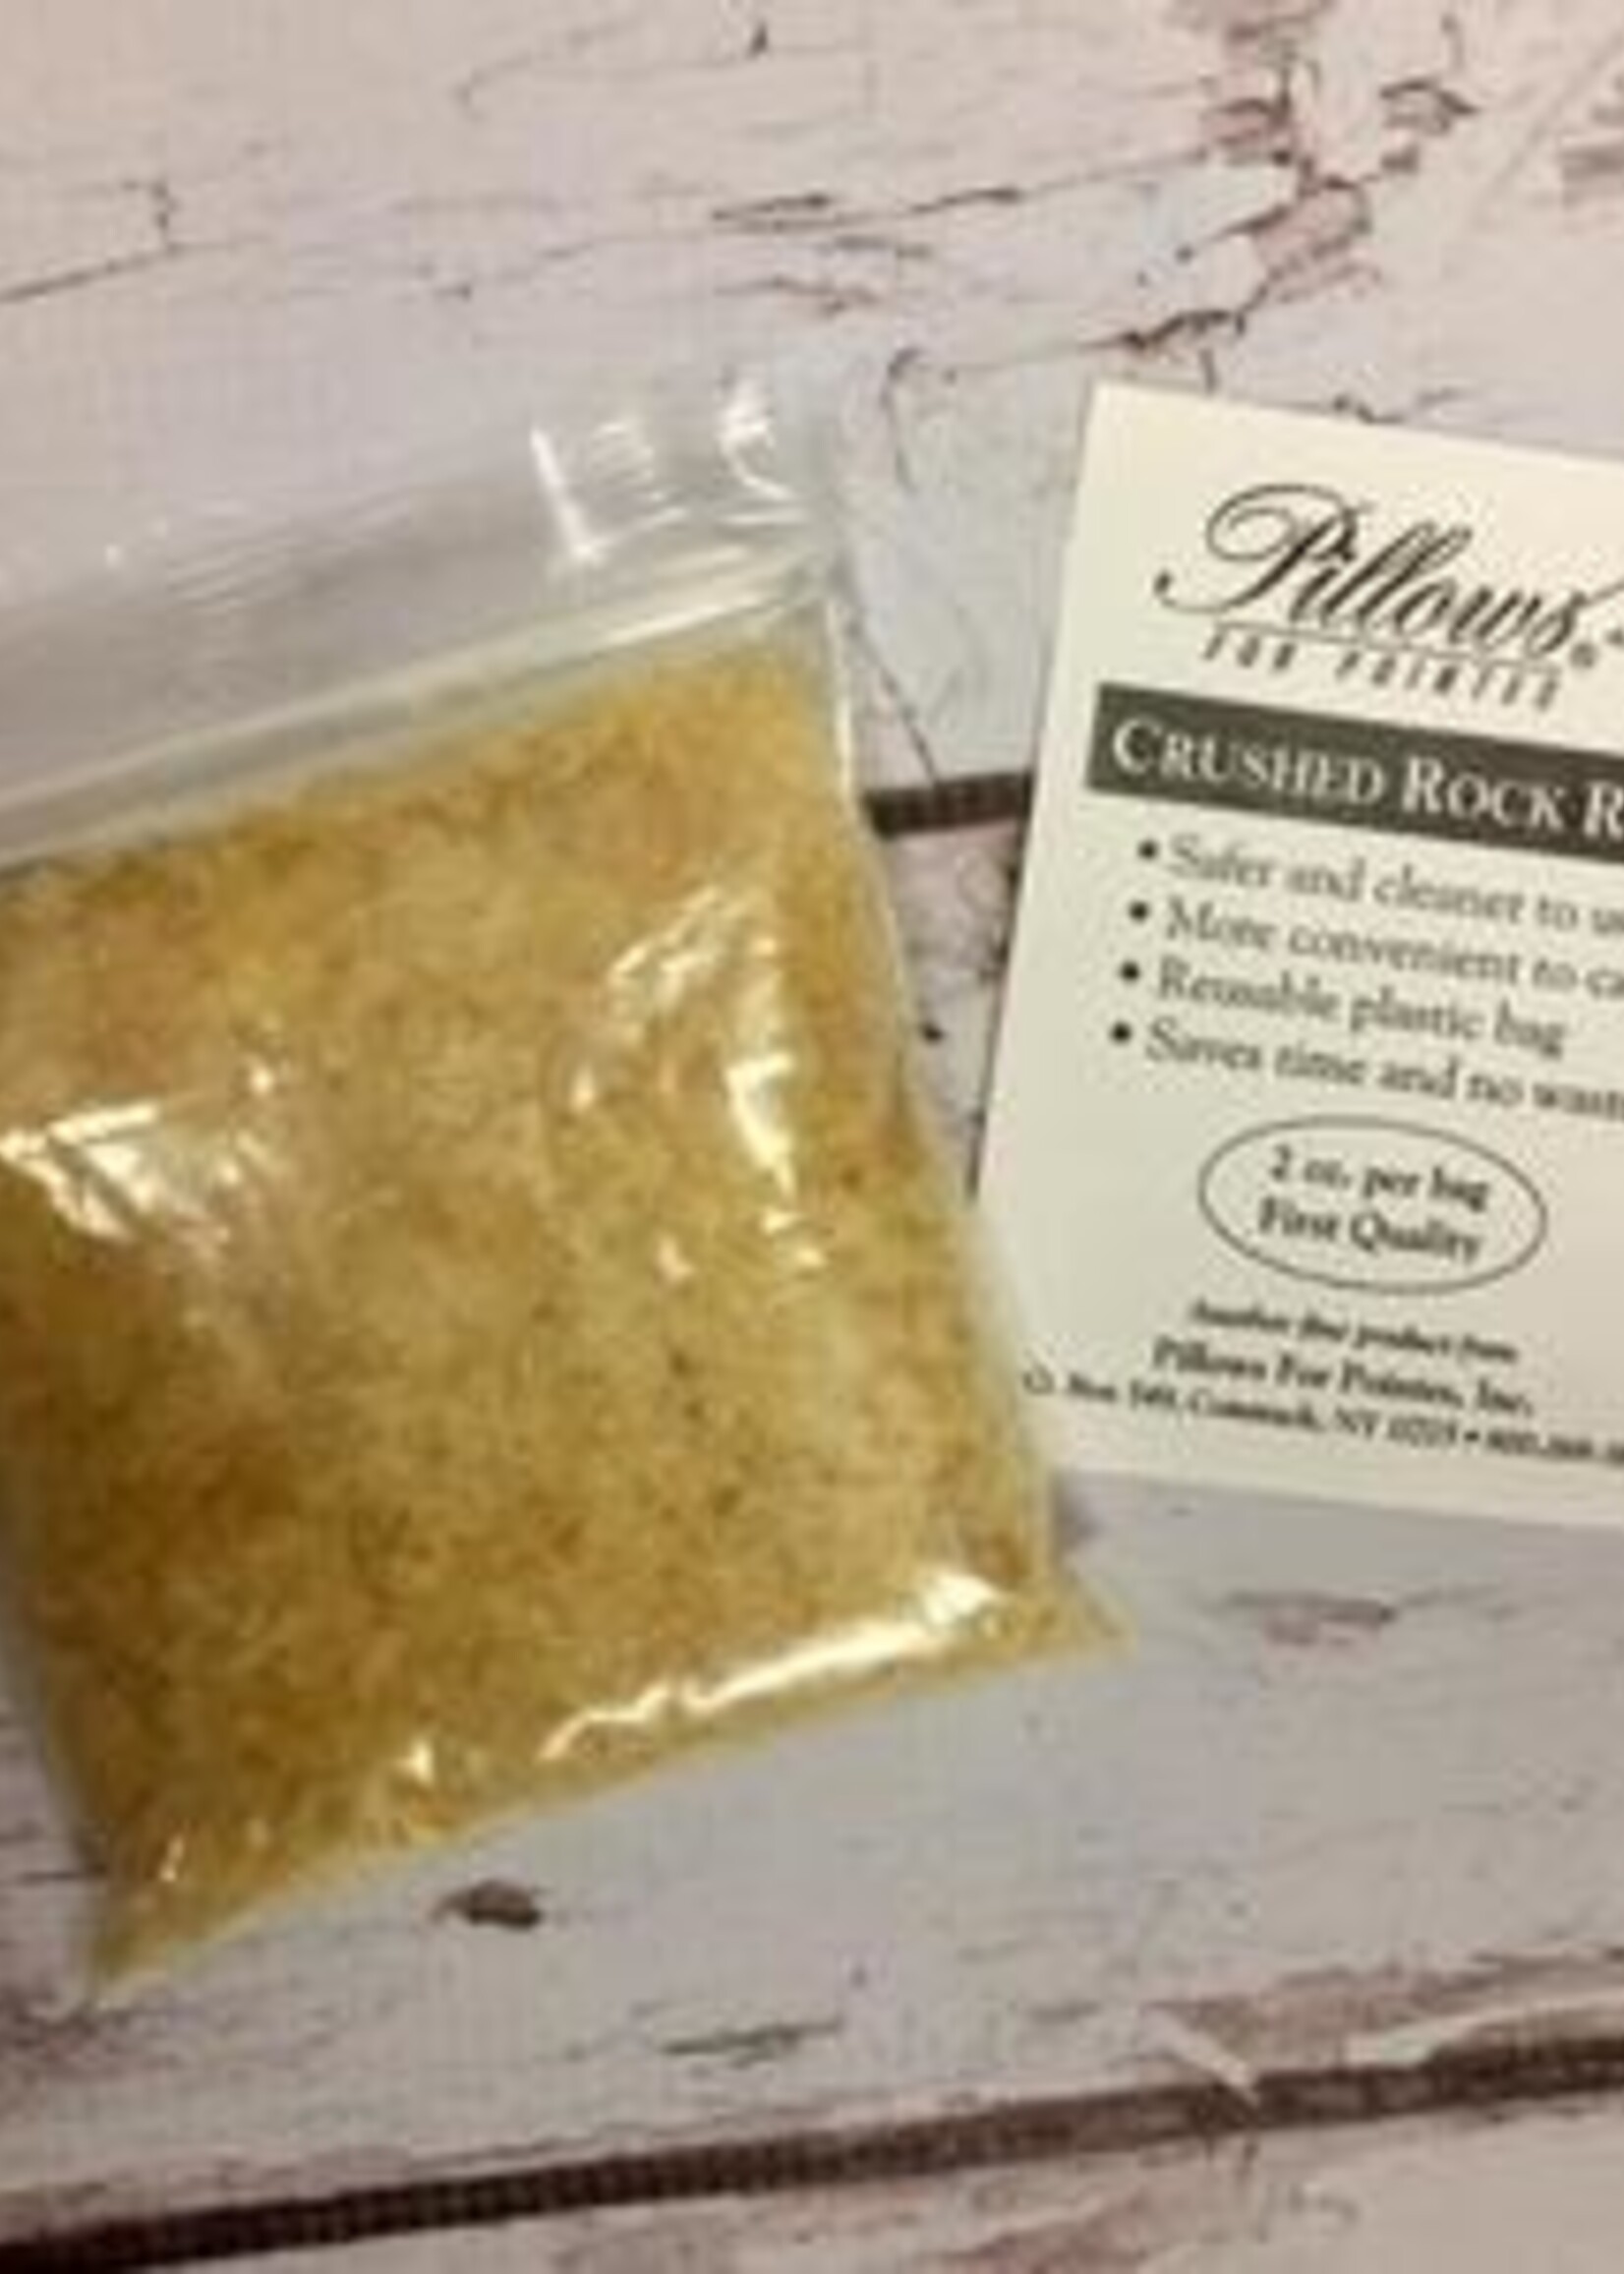 PILLOWS FOR POINTES CRUSHED ROCK ROSIN 2 OZ BAG